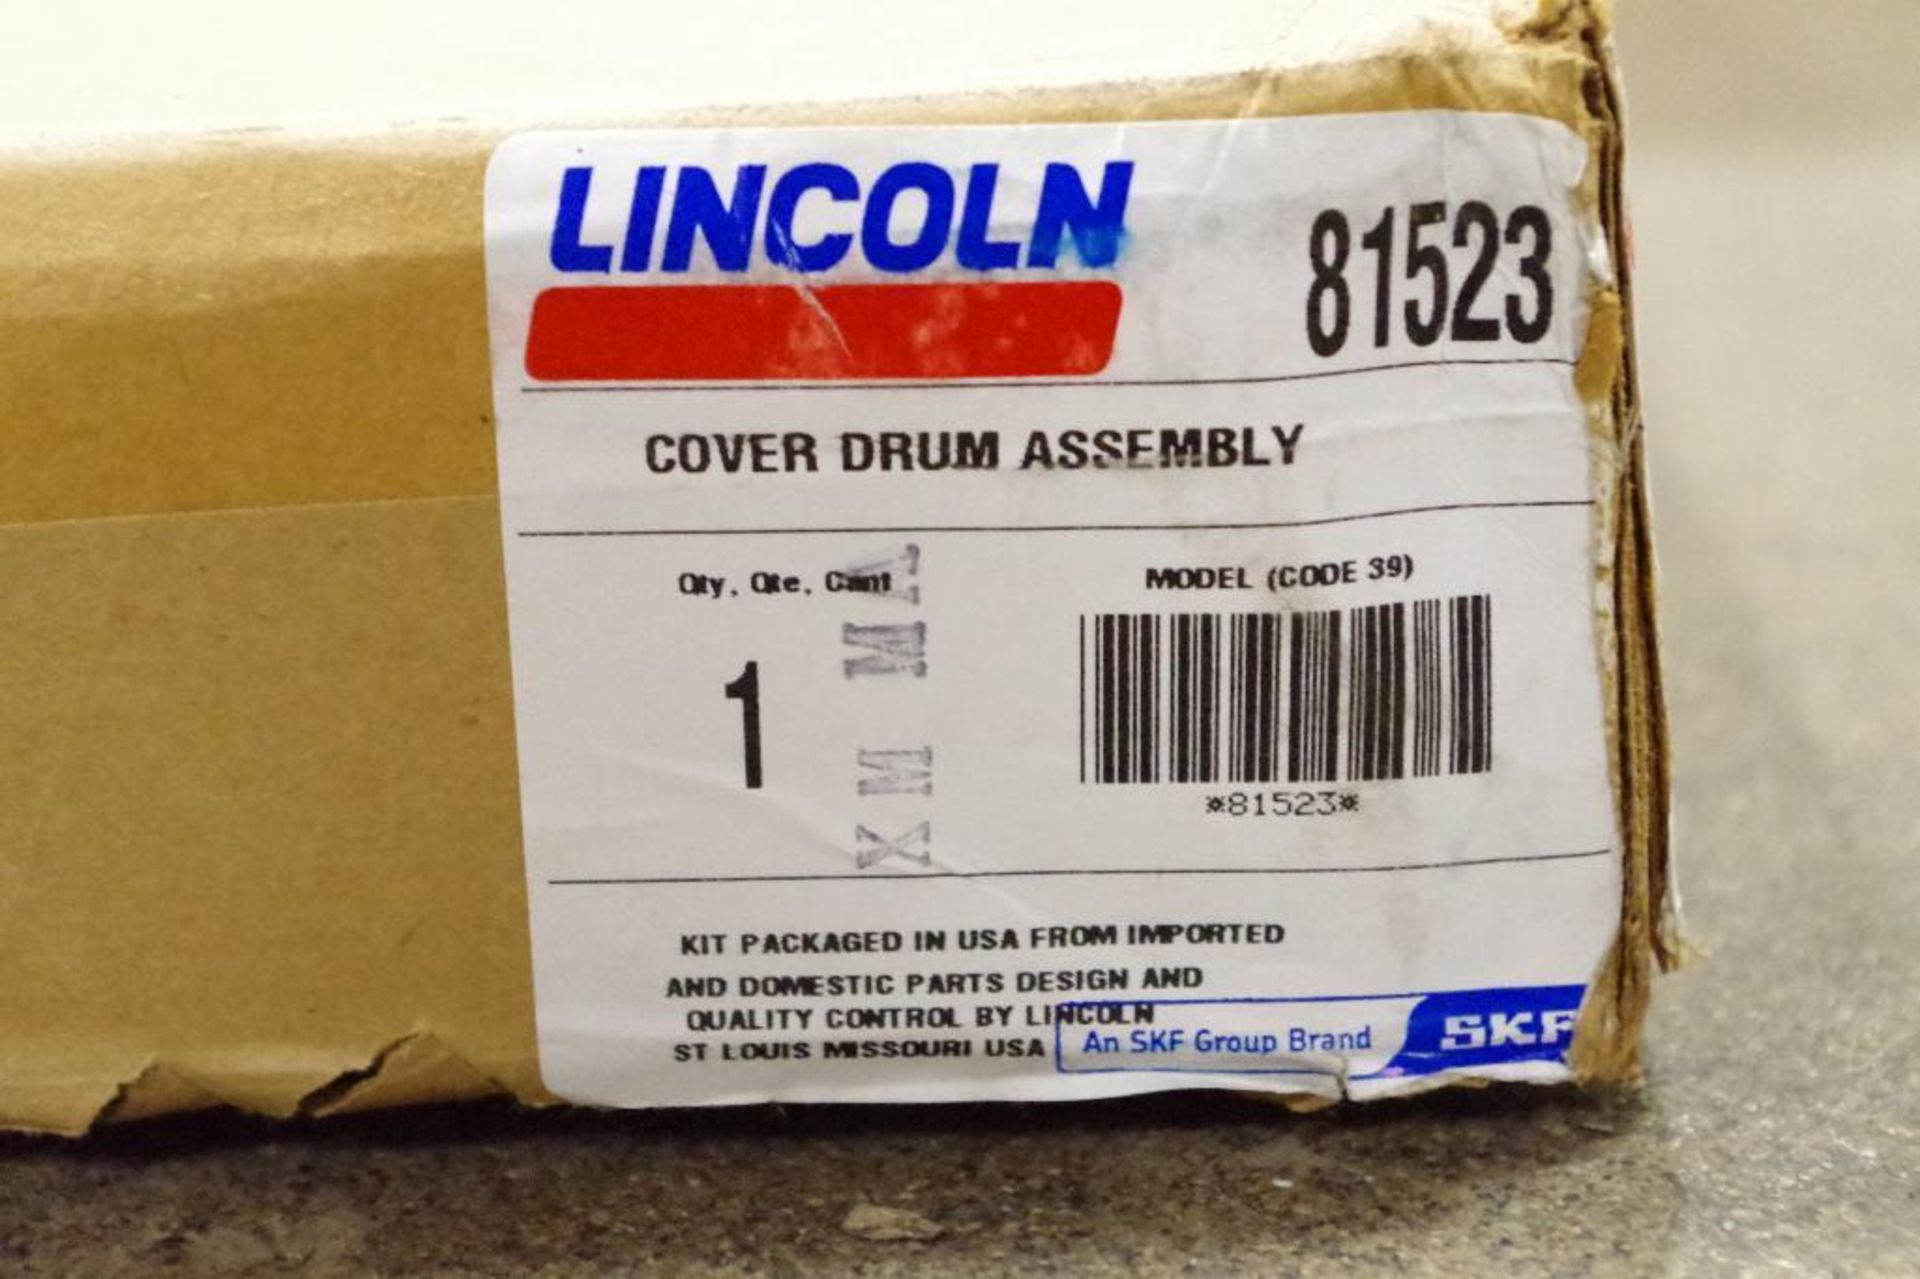 [1] NEW LINCOLN Drum Pump M/N 926-1 & [1] NEW LINCOLN Cover Drum Assembly M/N 81523 - Image 4 of 5